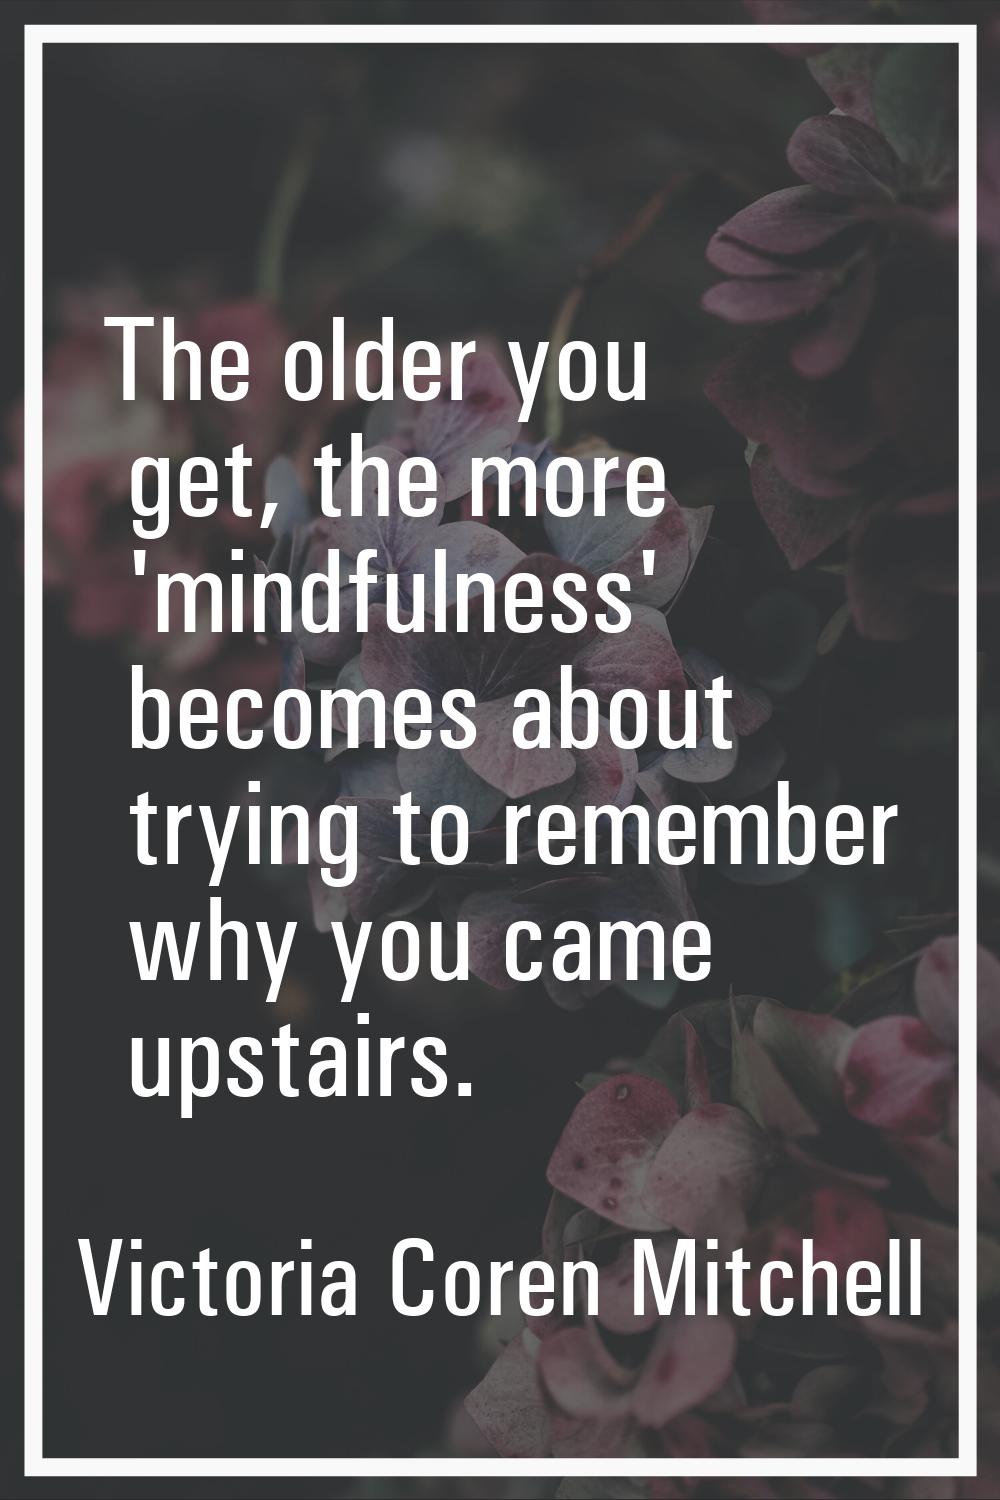 The older you get, the more 'mindfulness' becomes about trying to remember why you came upstairs.